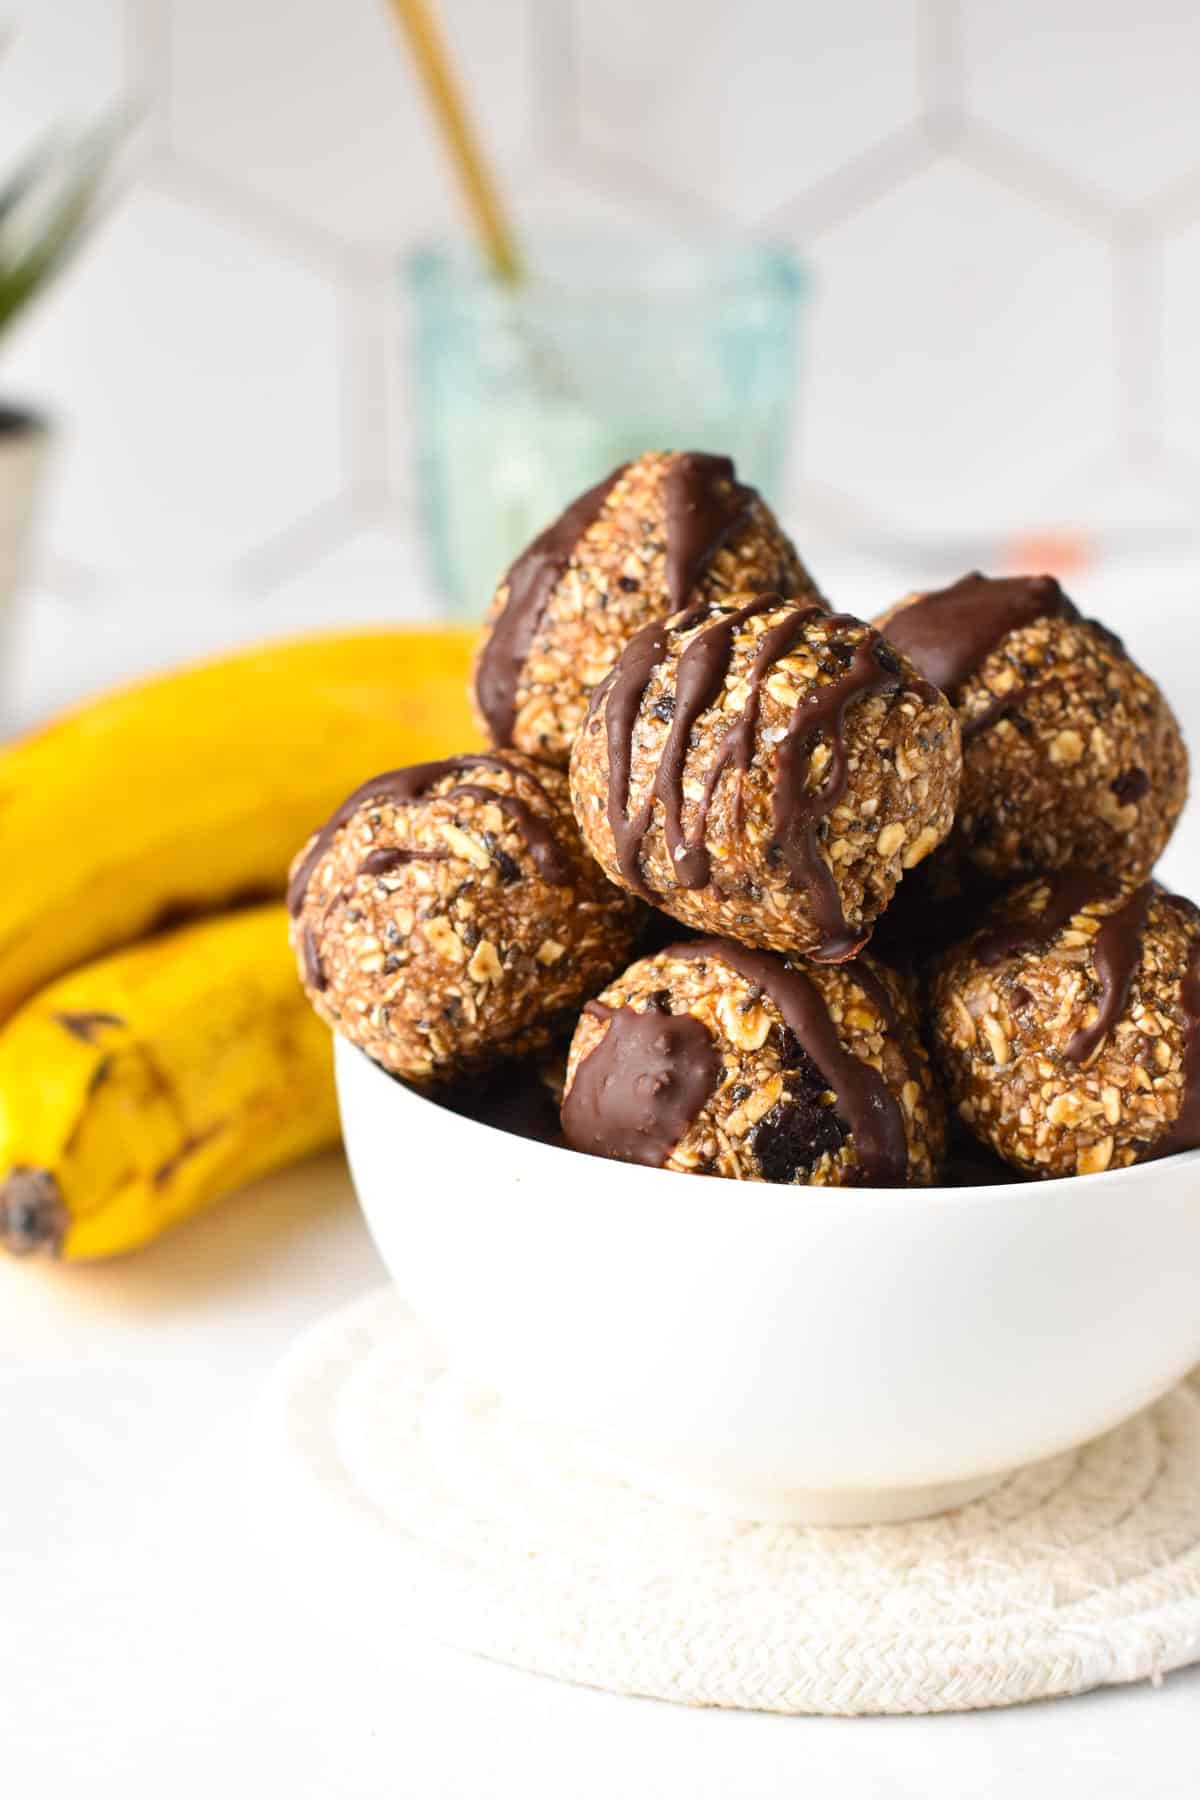 These peanut butter banana energy bites with chocolate chips are healthy breakfast on the go or post-workout energy bites to refuel with healthy carbs and plant-based protein. 